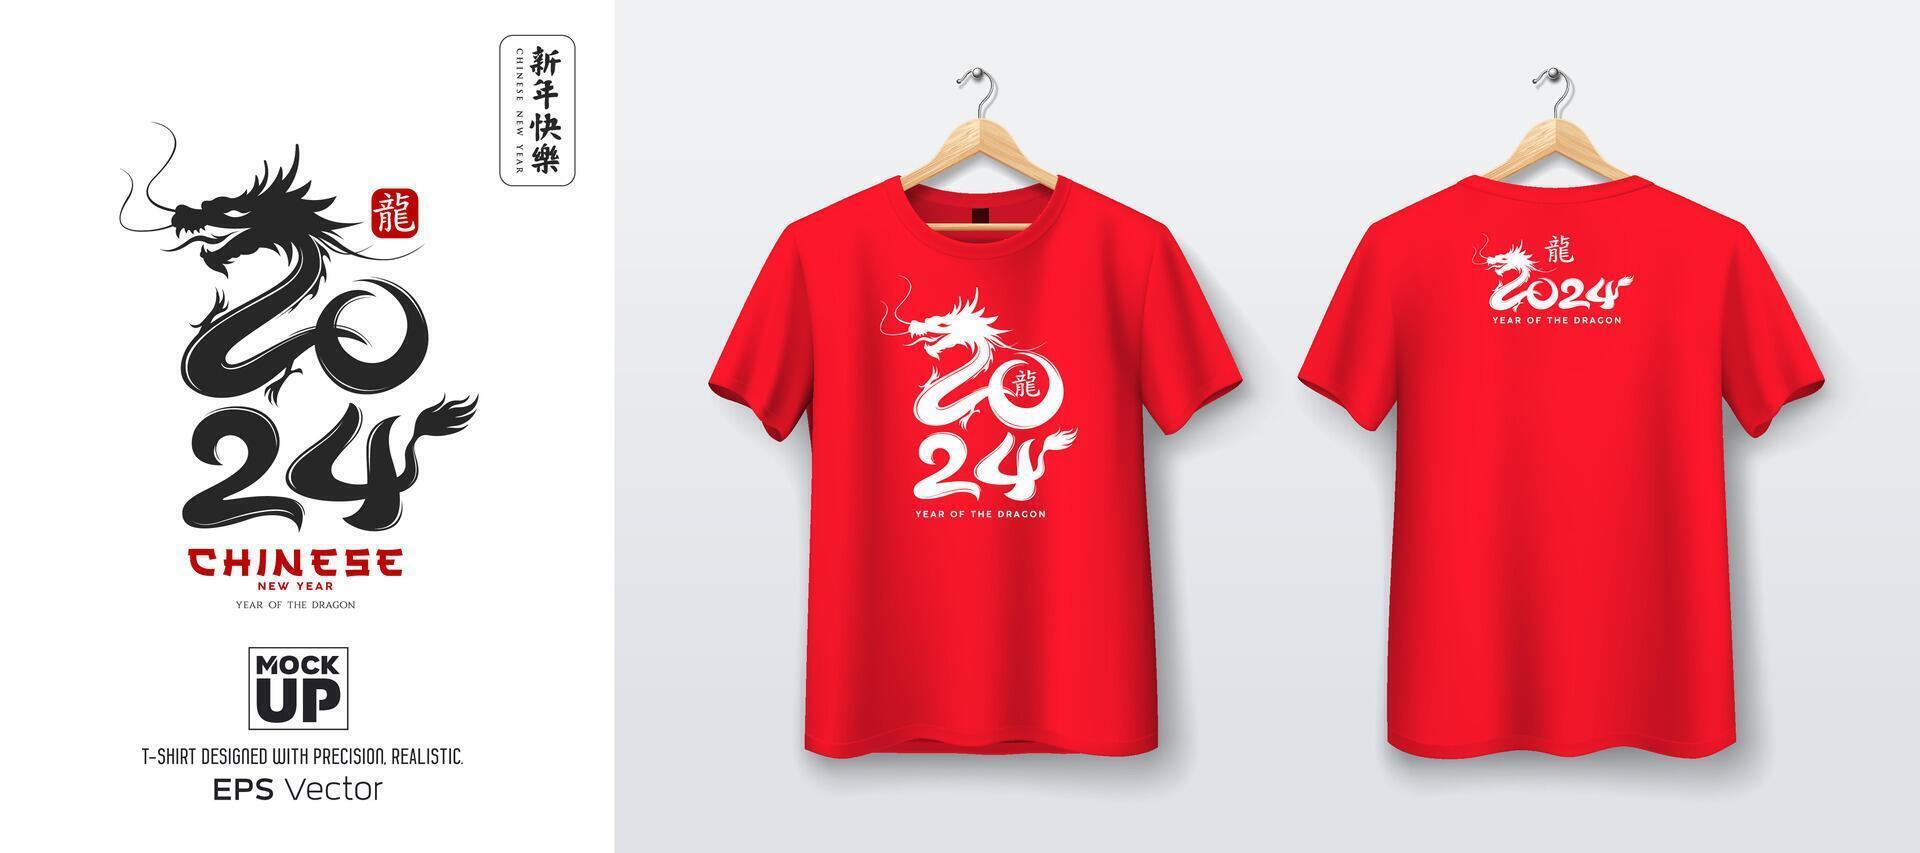 Red t shirt front and back mockup collections, Chinese new year 2024, year of the dragon template design, Characters translation dragon, EPS10 Vector illustration.